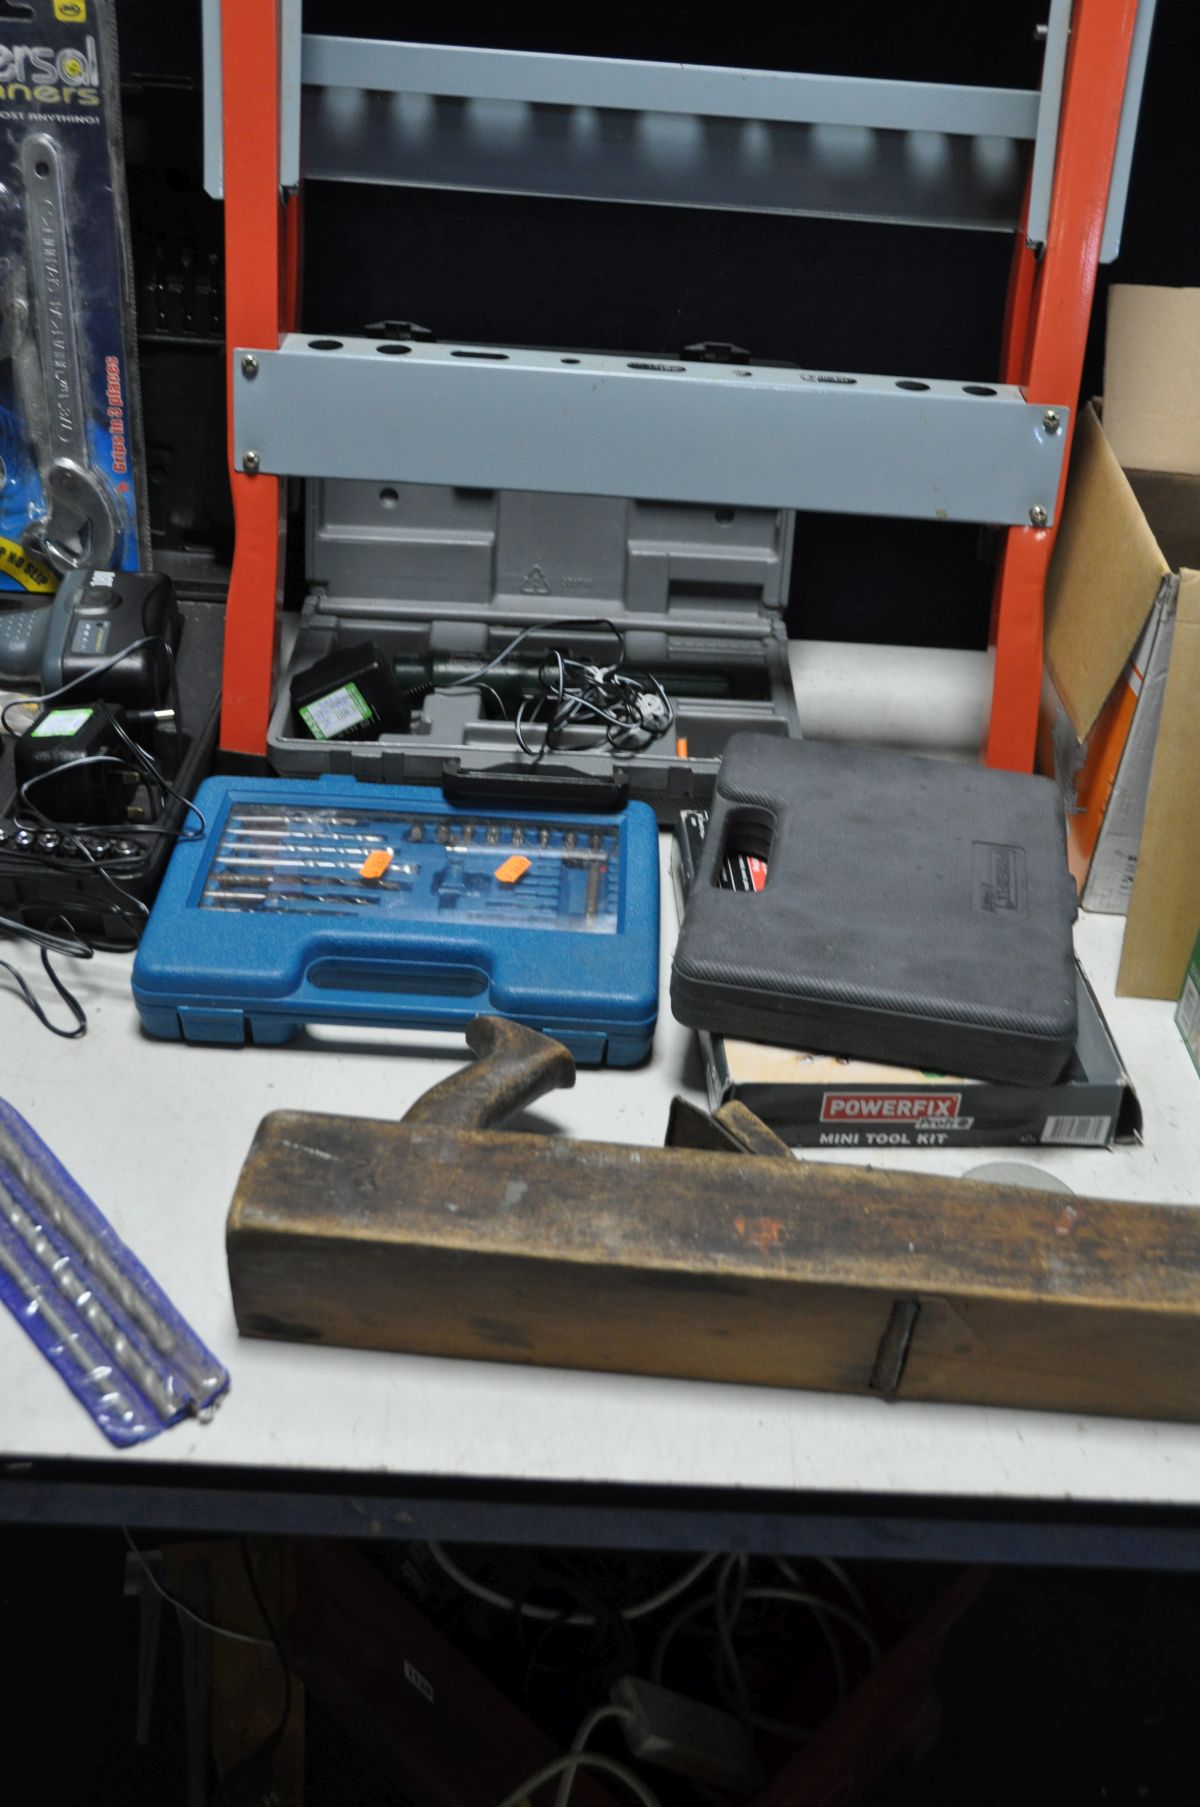 A COLLECTION OF POWER TOOLS including a B&Q circular Saw, a Challenge Xtreme 18V drill set, a - Image 3 of 5